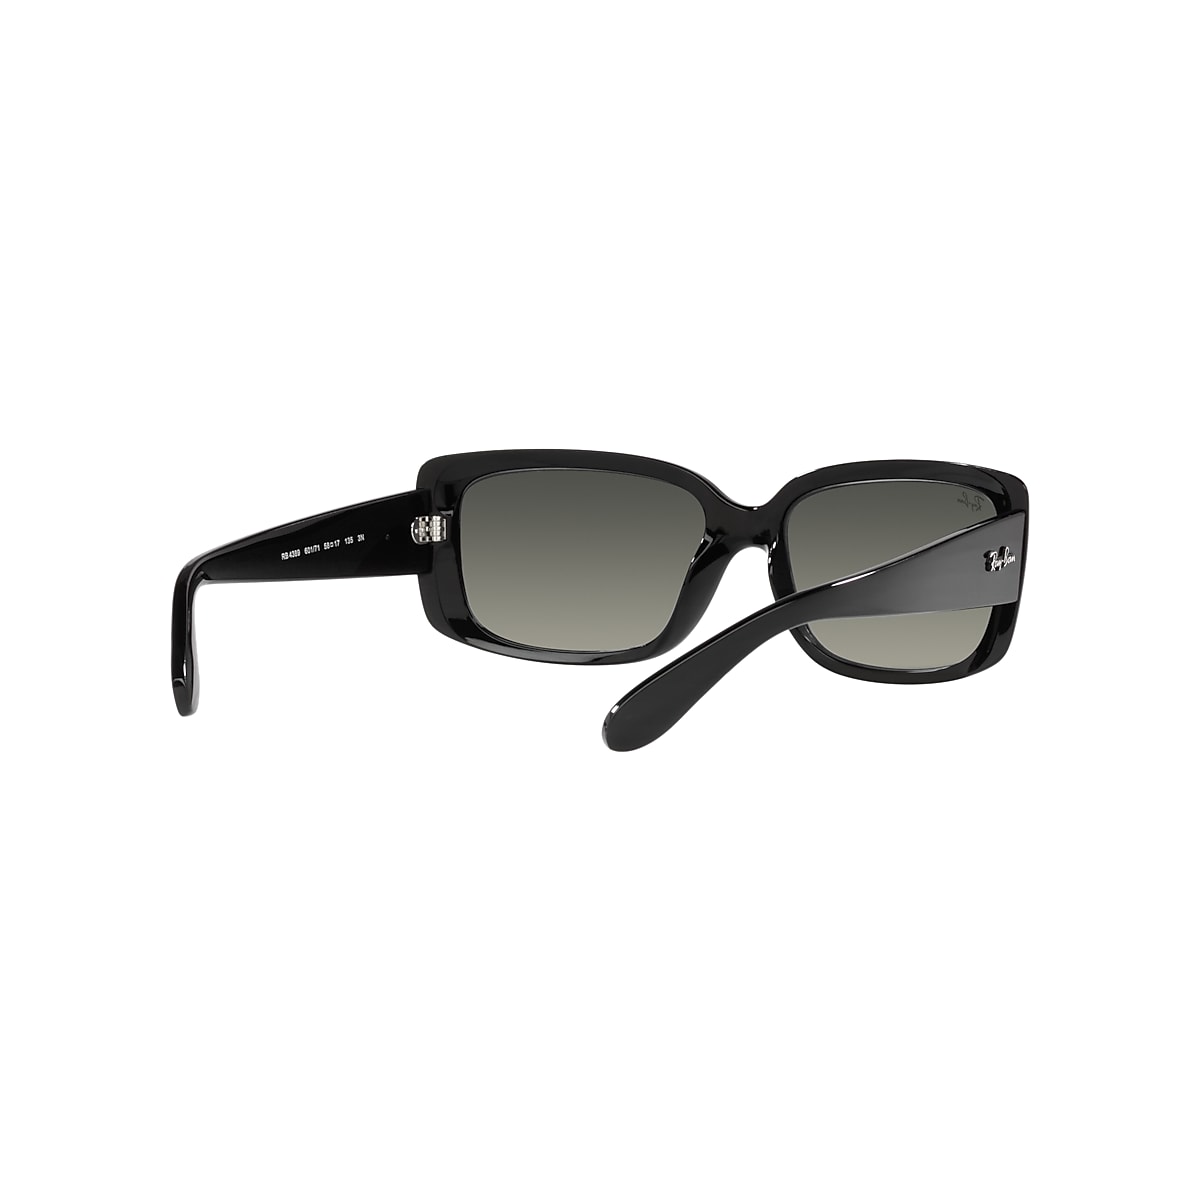 RB4389 Sunglasses in Black and Grey - RB4389 | Ray-Ban® US